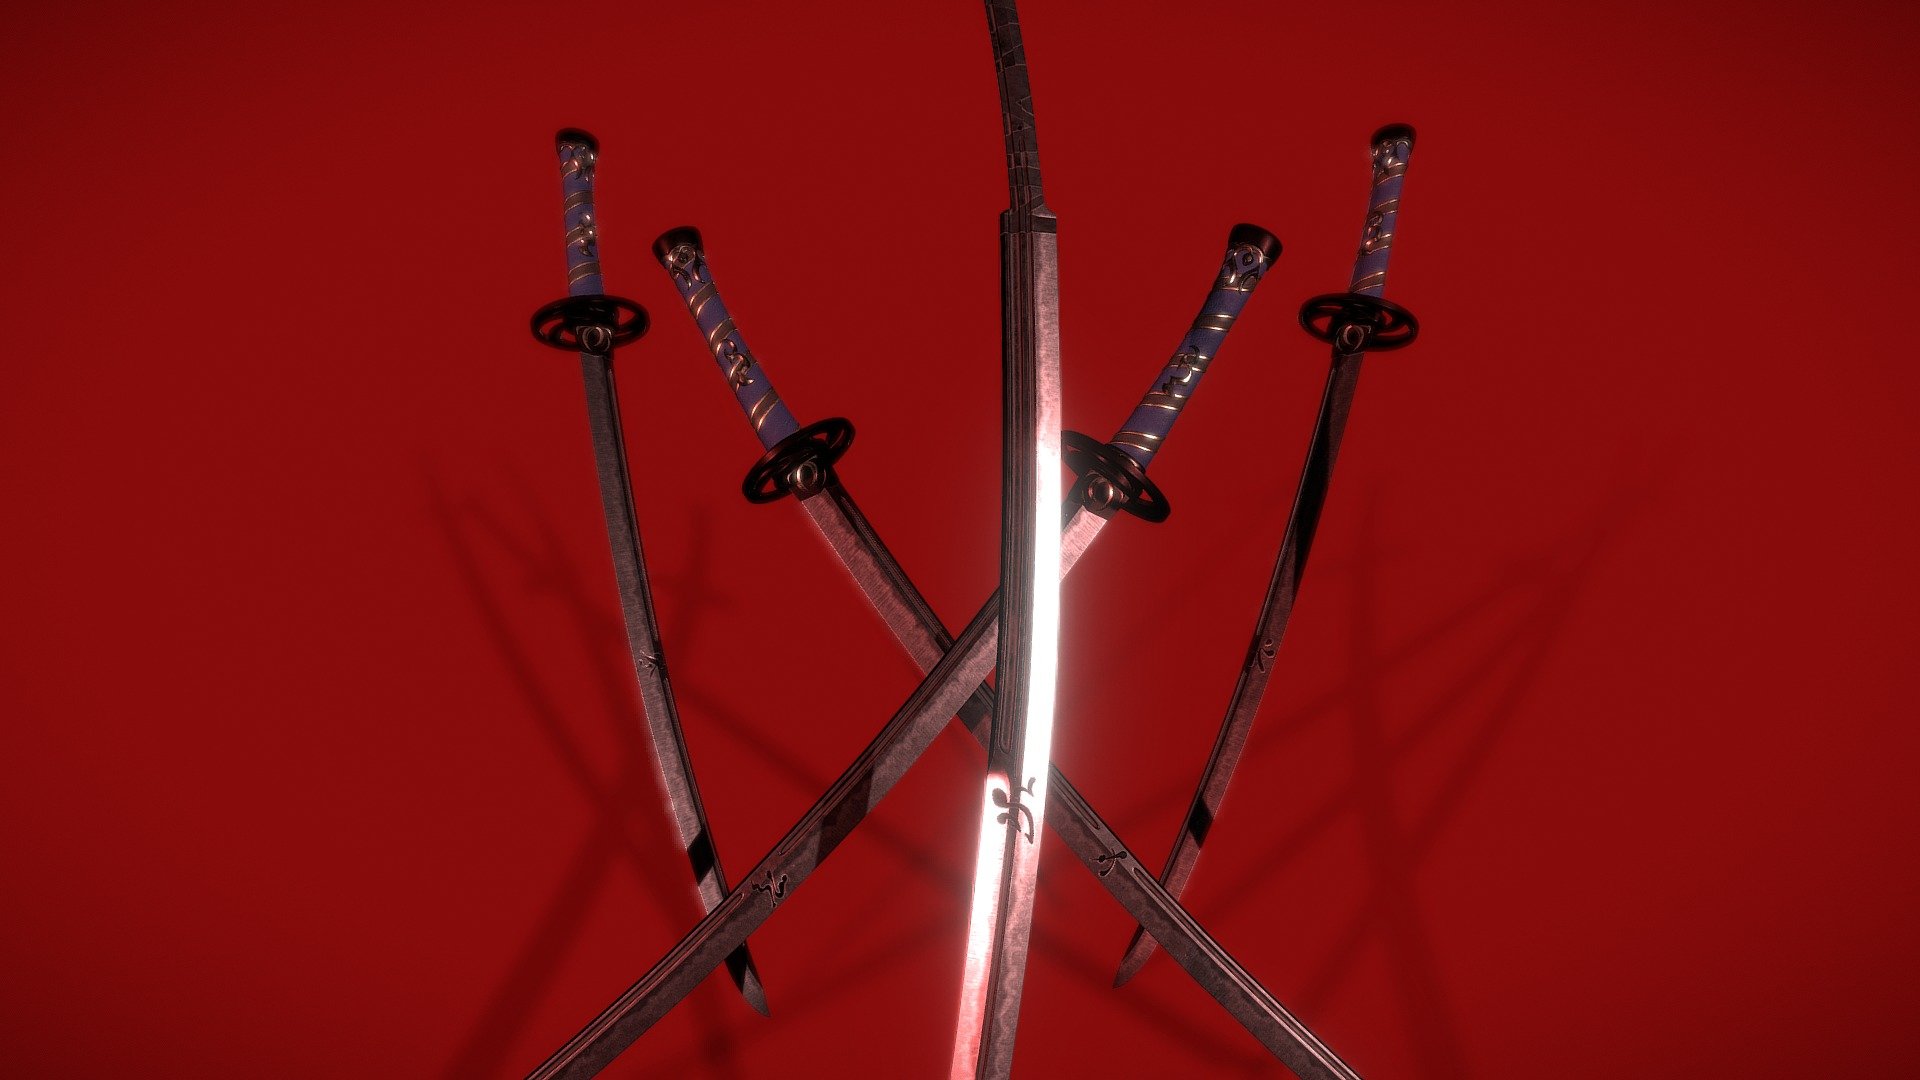 Miyamoto Musashi's 5 swords from Fate/Grand Order

Textures are in 2048px and 4096px

maded in blender 2.90.0

The extra file contain just the blend file and the 4096px textures - Musashi's Swords - Buy Royalty Free 3D model by Saru Models (@saru-models) 3d model